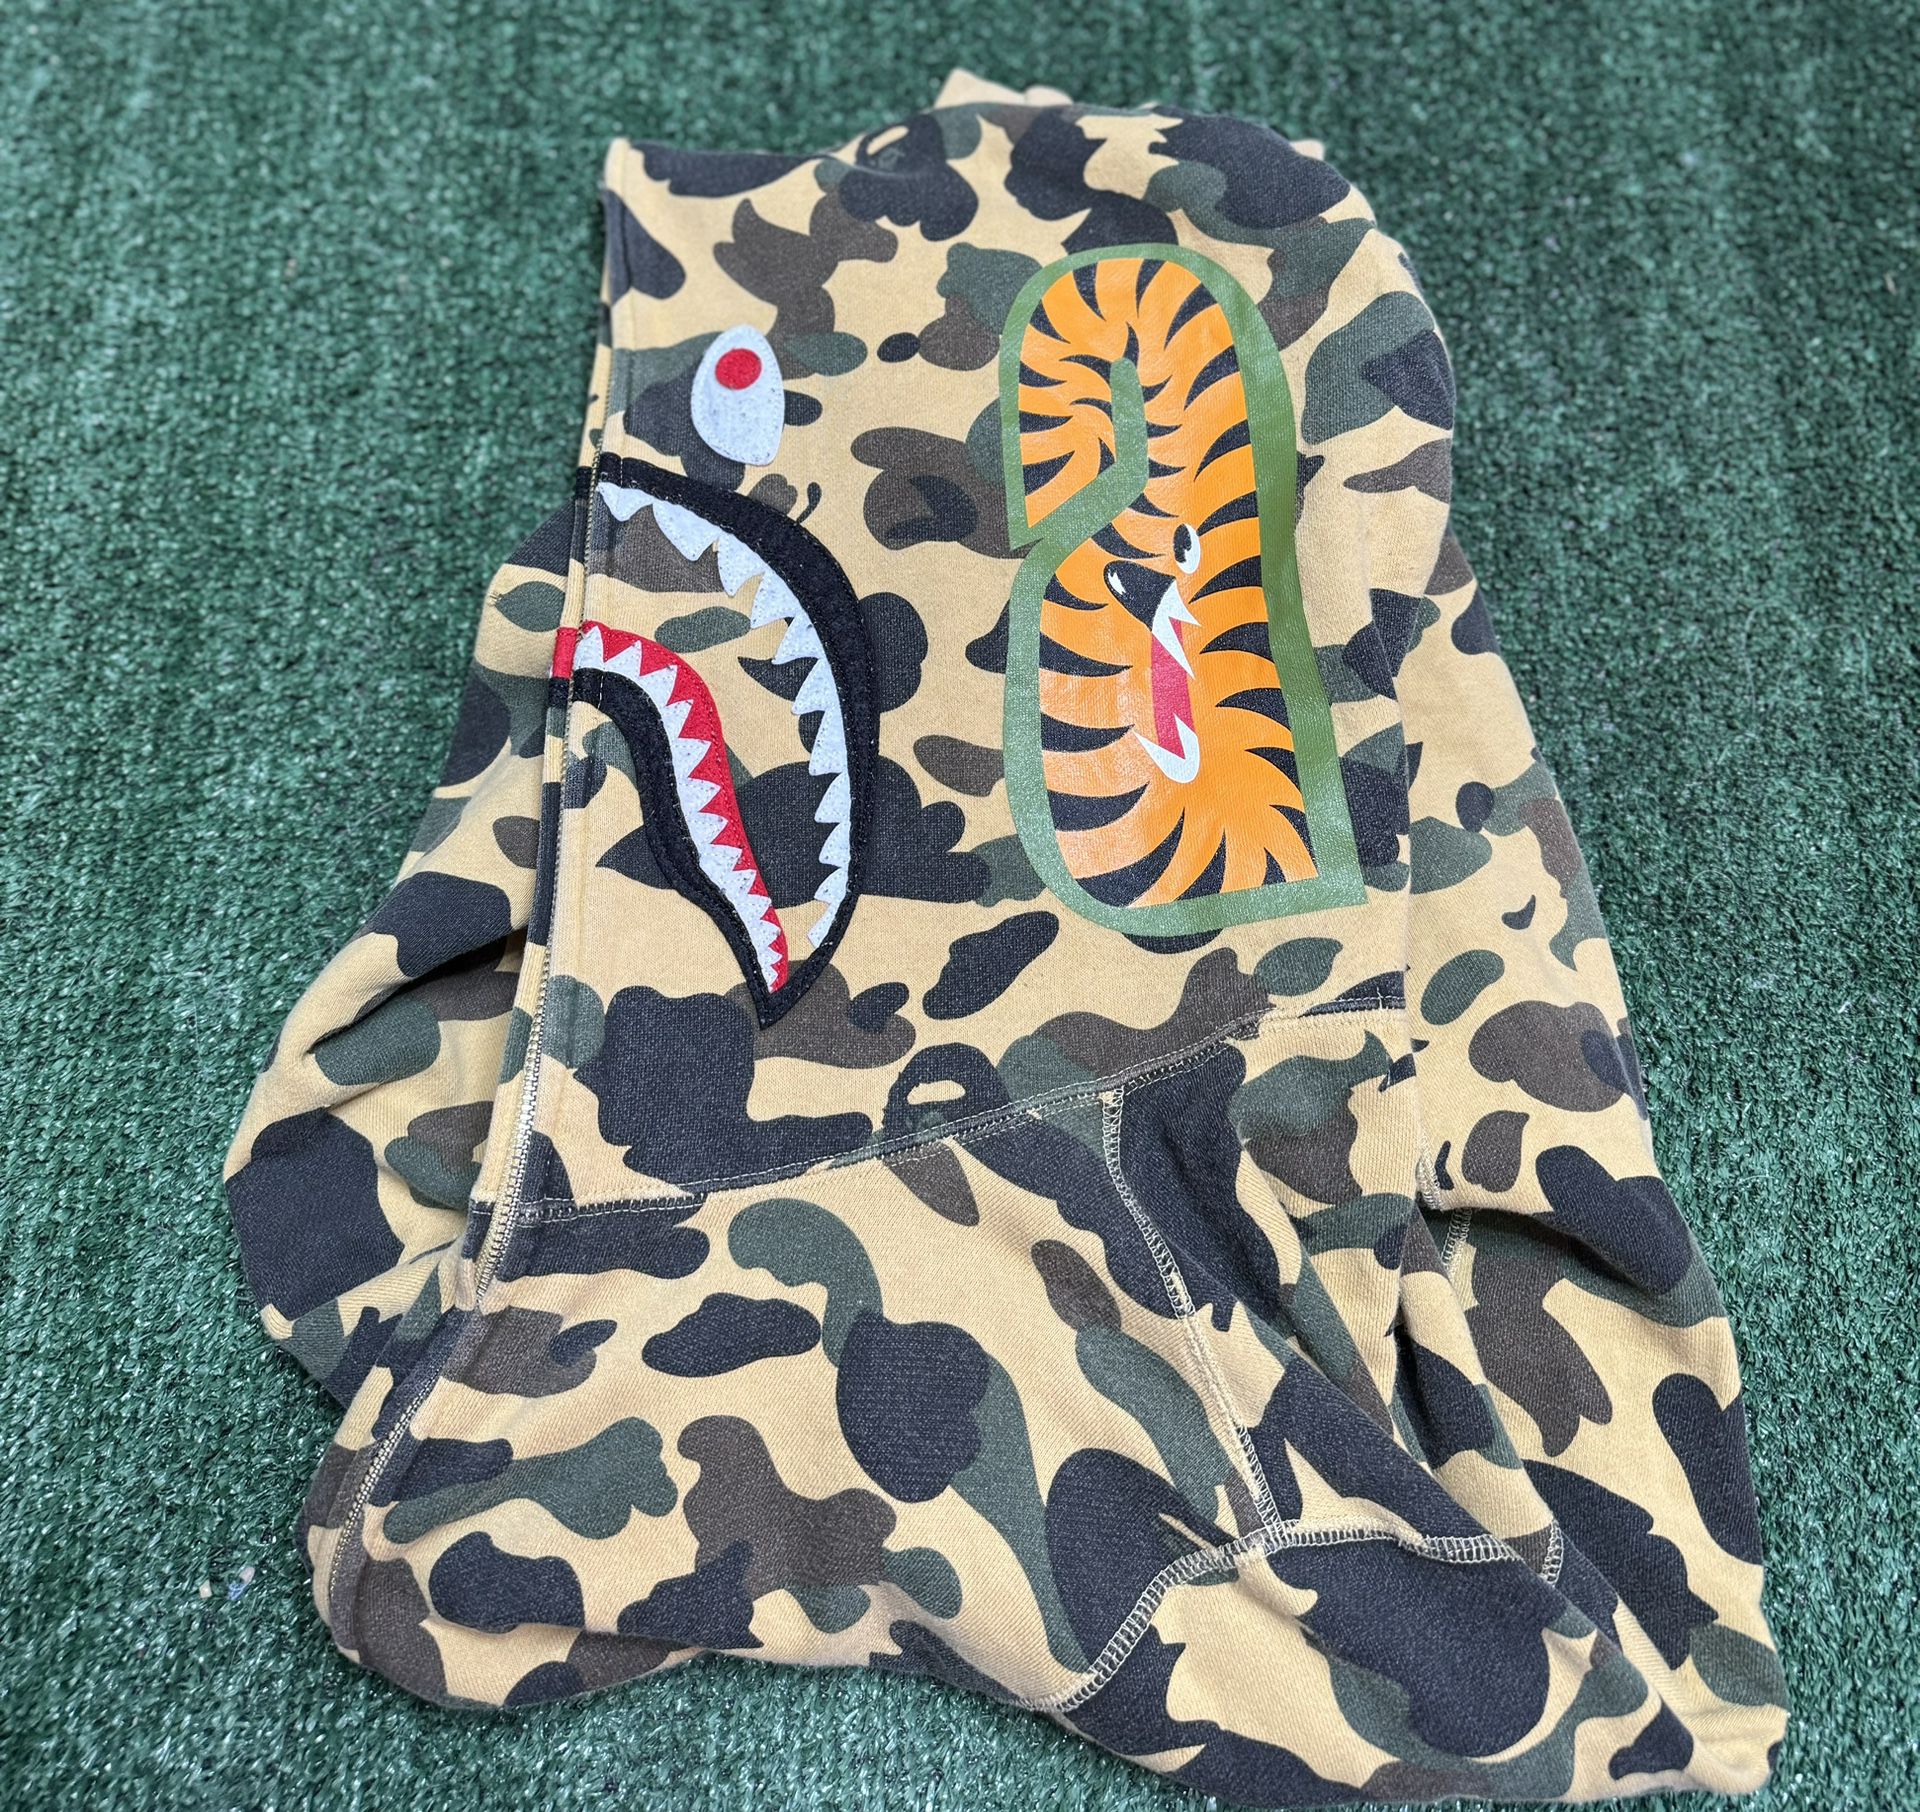 BAPE 1st Camo Shark Full Zip Hoodie Yellow size L USED But Clean